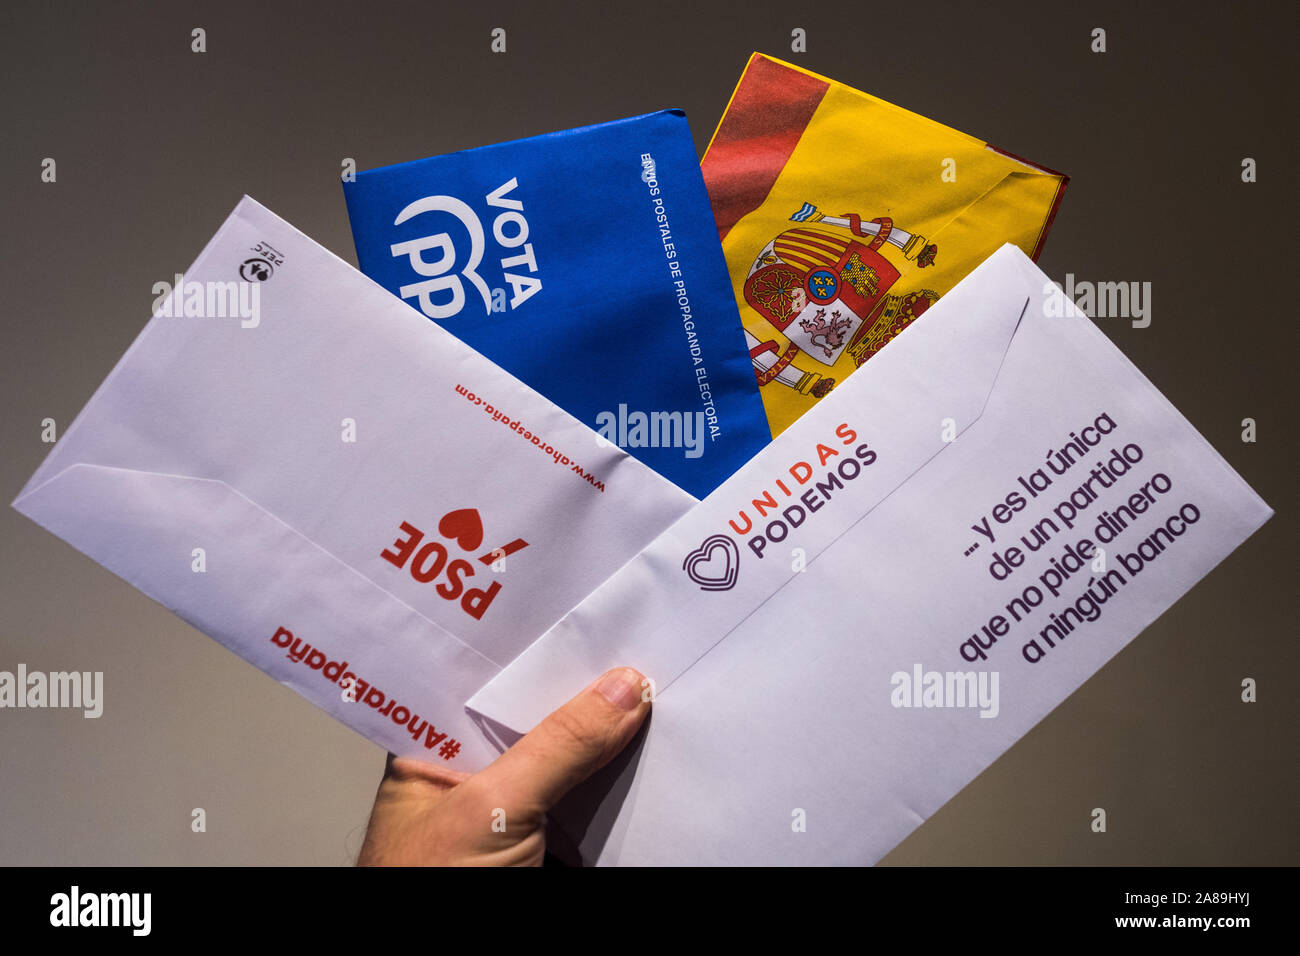 Madrid, Spain, November 7, 2019. A hand of a man showing postal mail of some of the main Spanish political parties (PSOE, PP, VOX, Unidas Podemos) that contains the ballots to vote in the next general elections that will take place on November 10 in Spain. Credit: Marcos del Mazo/Alamy Live News Stock Photo